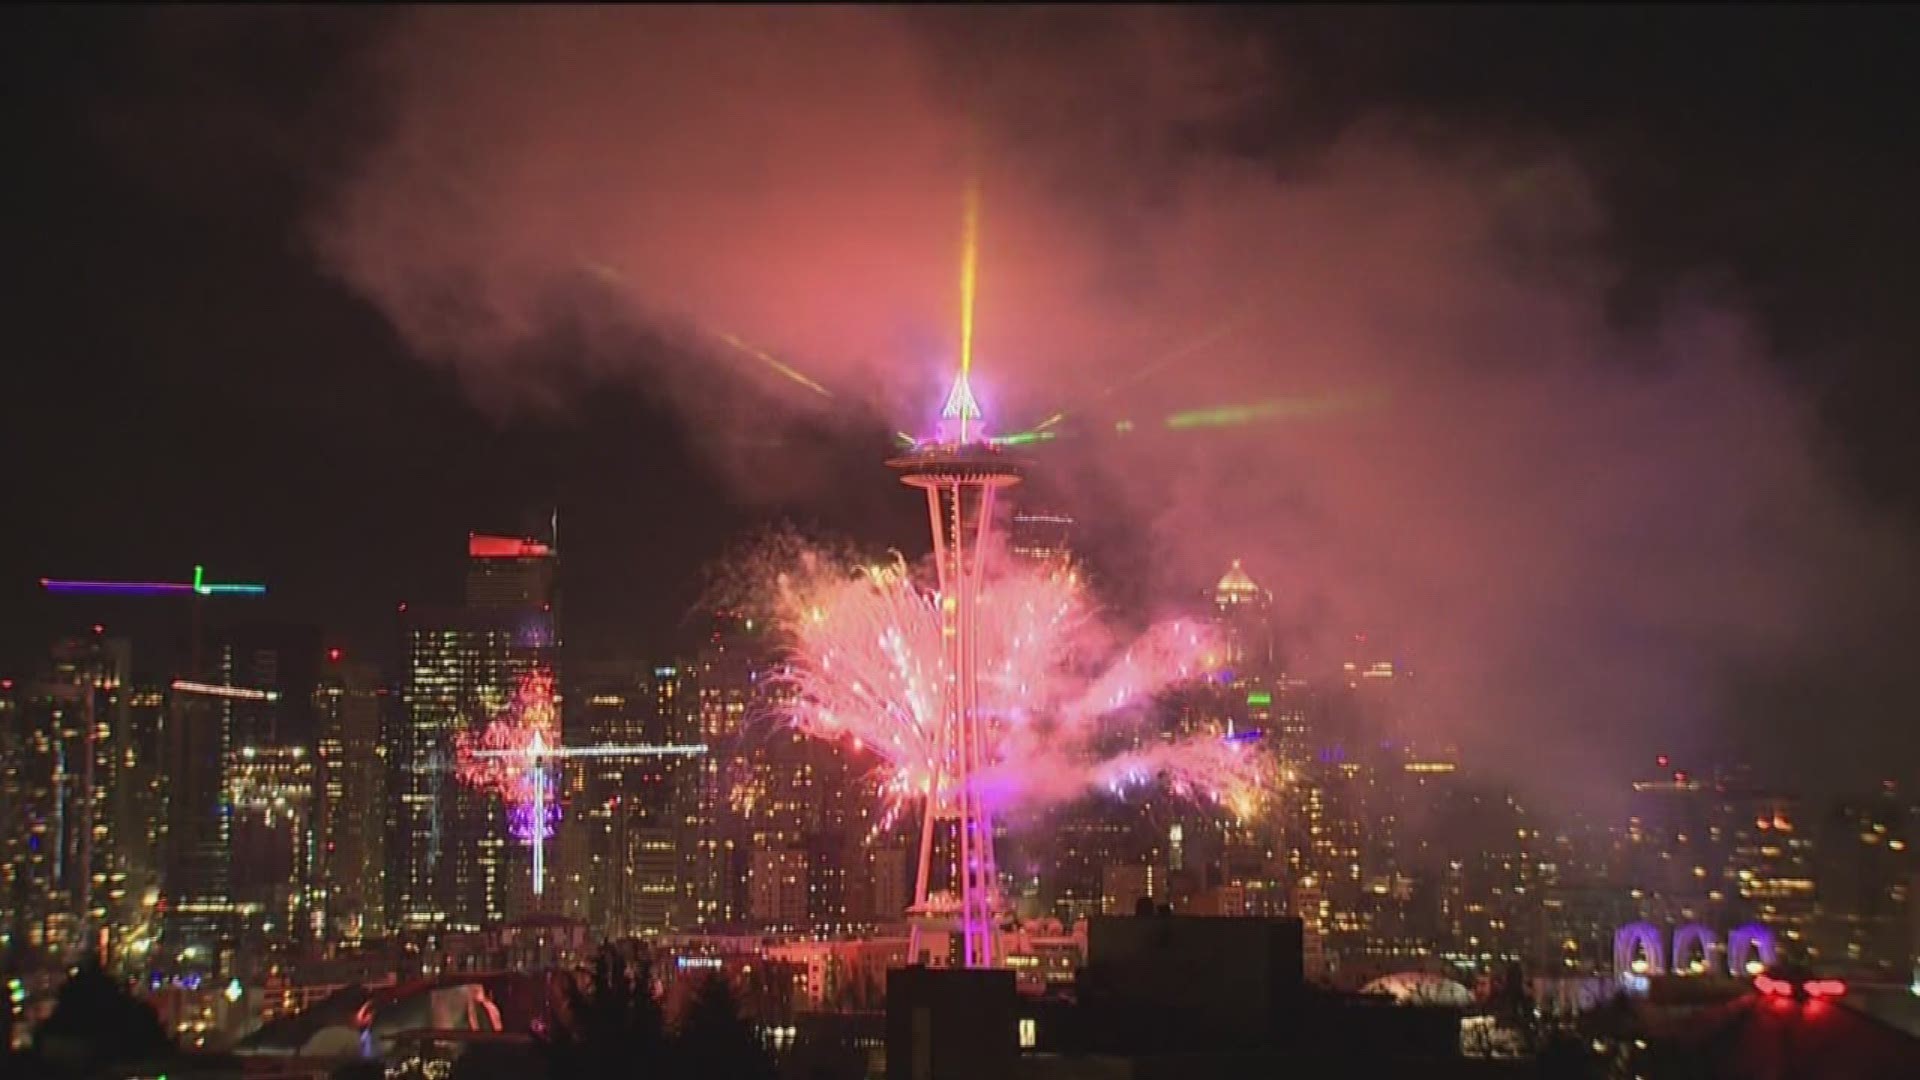 The Space Needle celebrated its 25th annual fireworks show to ring in 2019. This year's show featured a brand new laser light show from the recently renovated Space Needle. Watch the full program here: https://kng5.tv/NYE2019 #NYESeattle